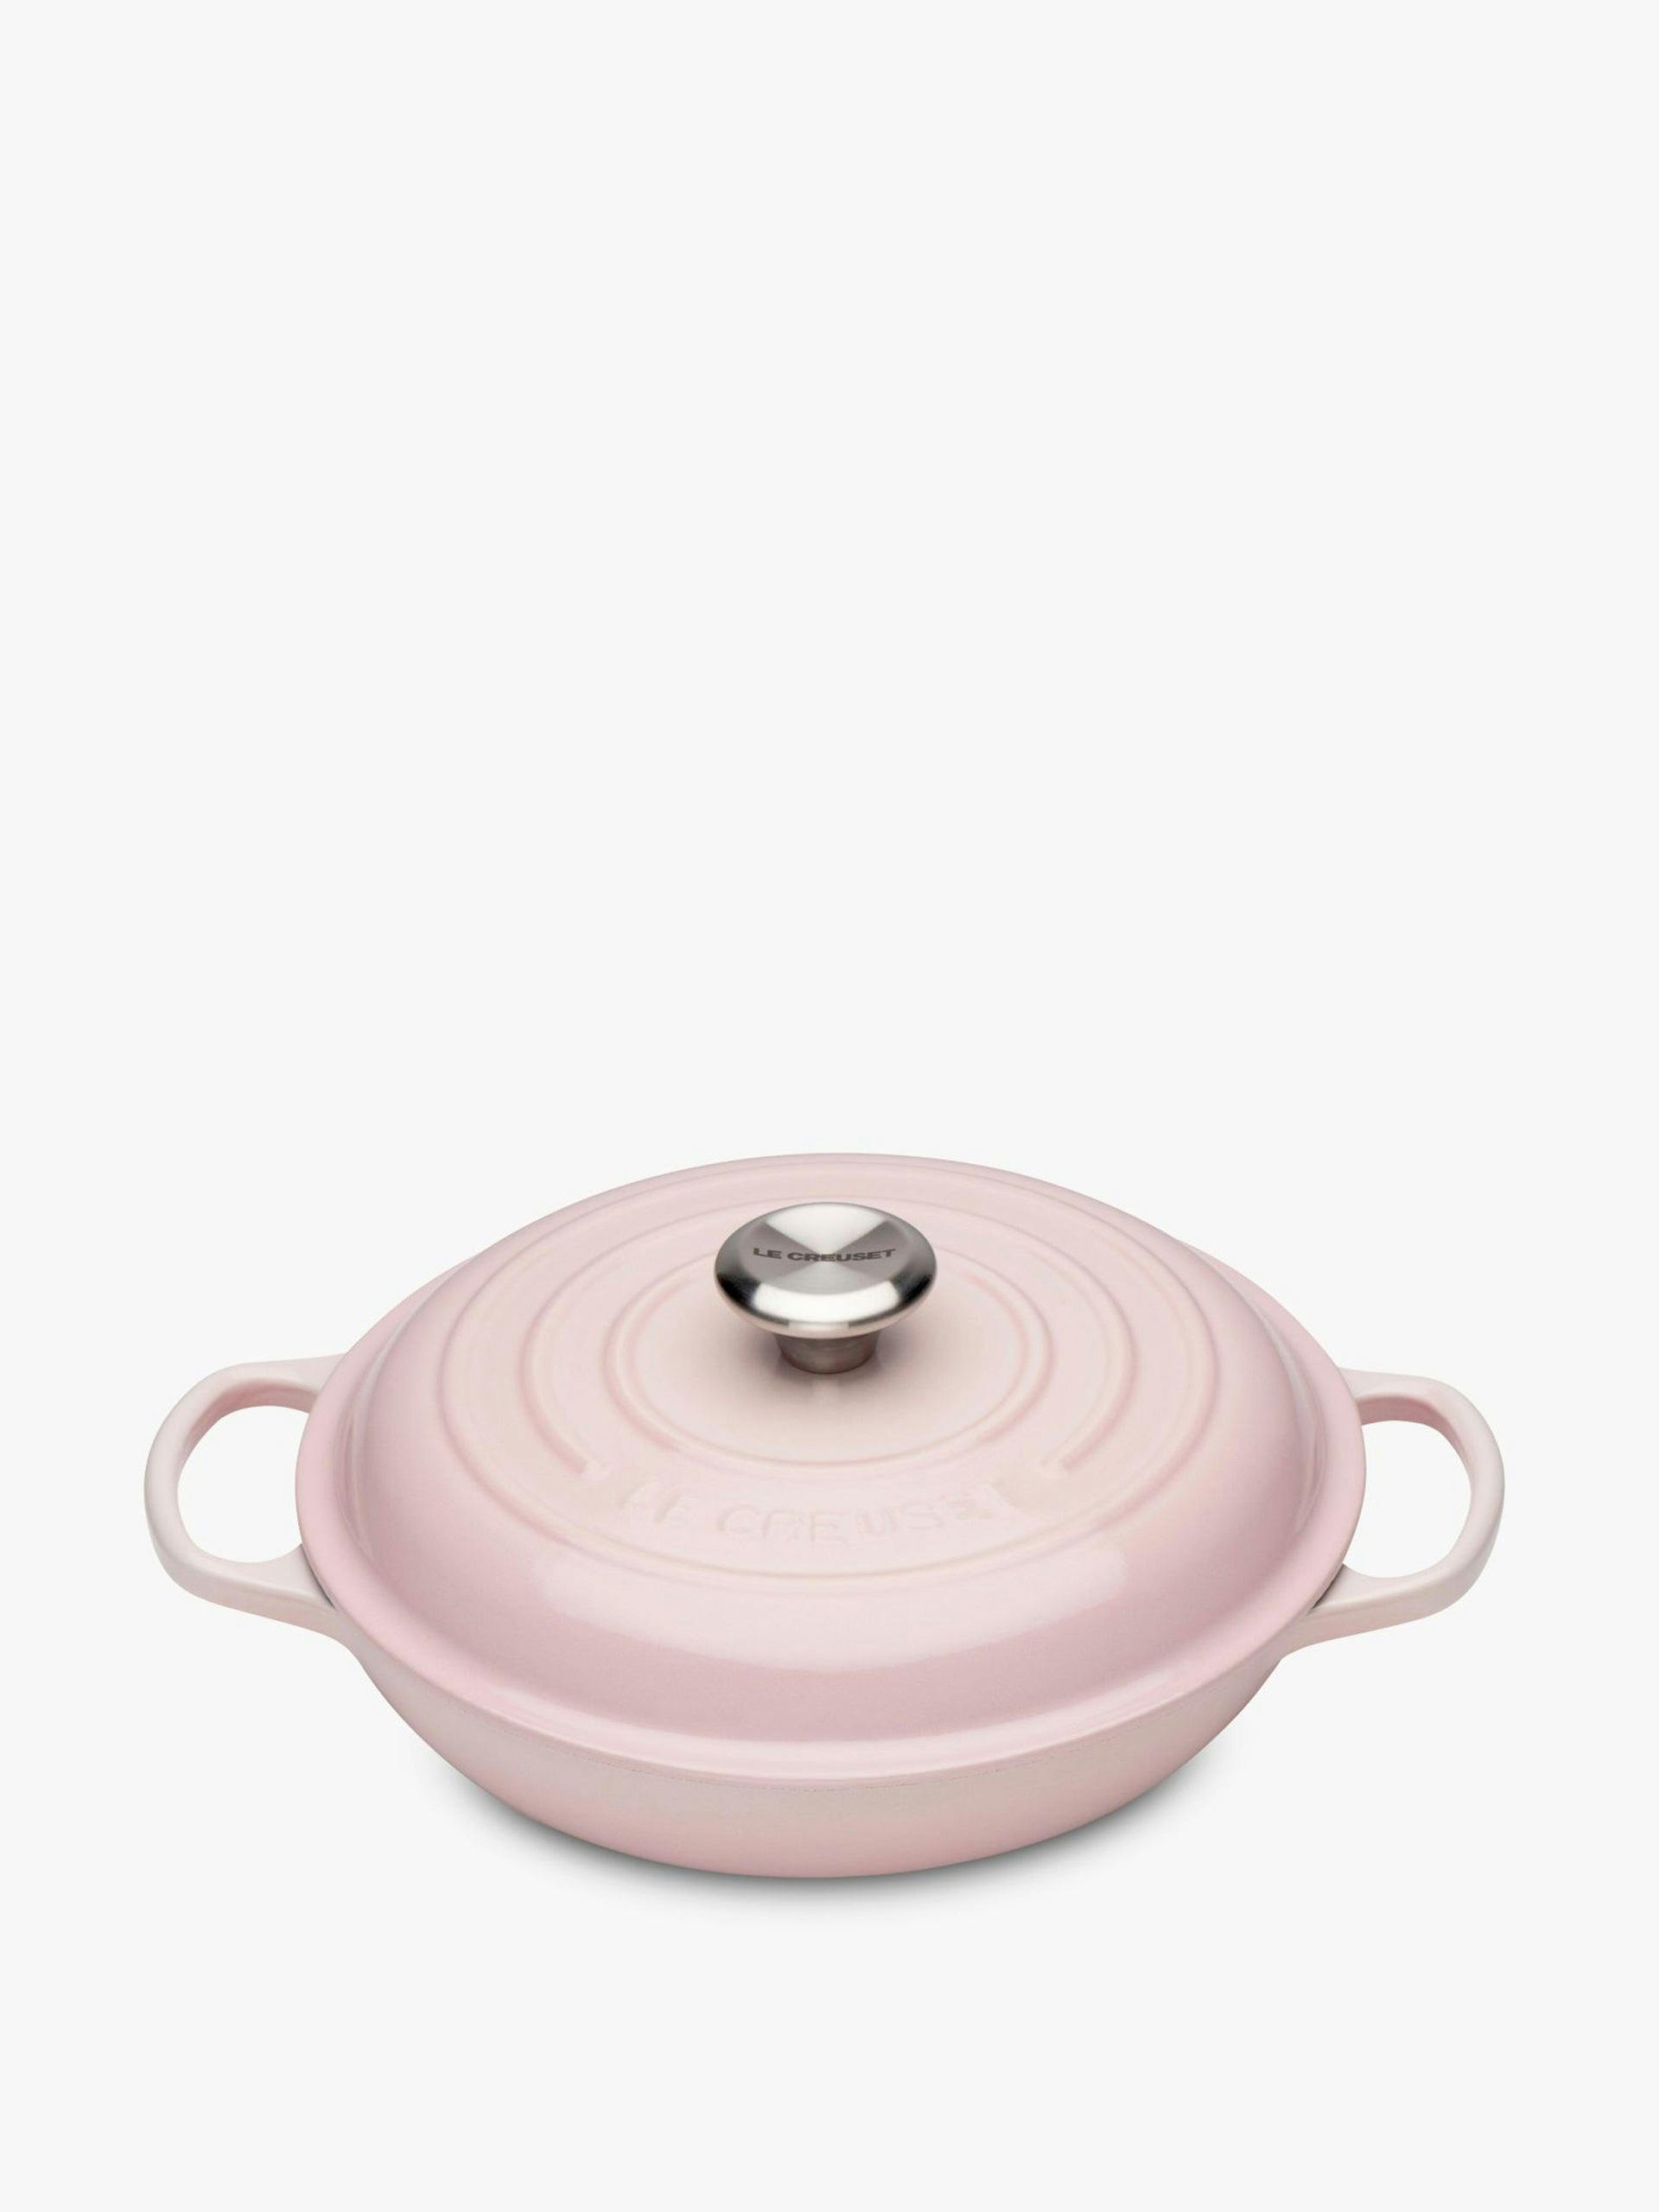 Cast iron signature shallow casserole in shell pink